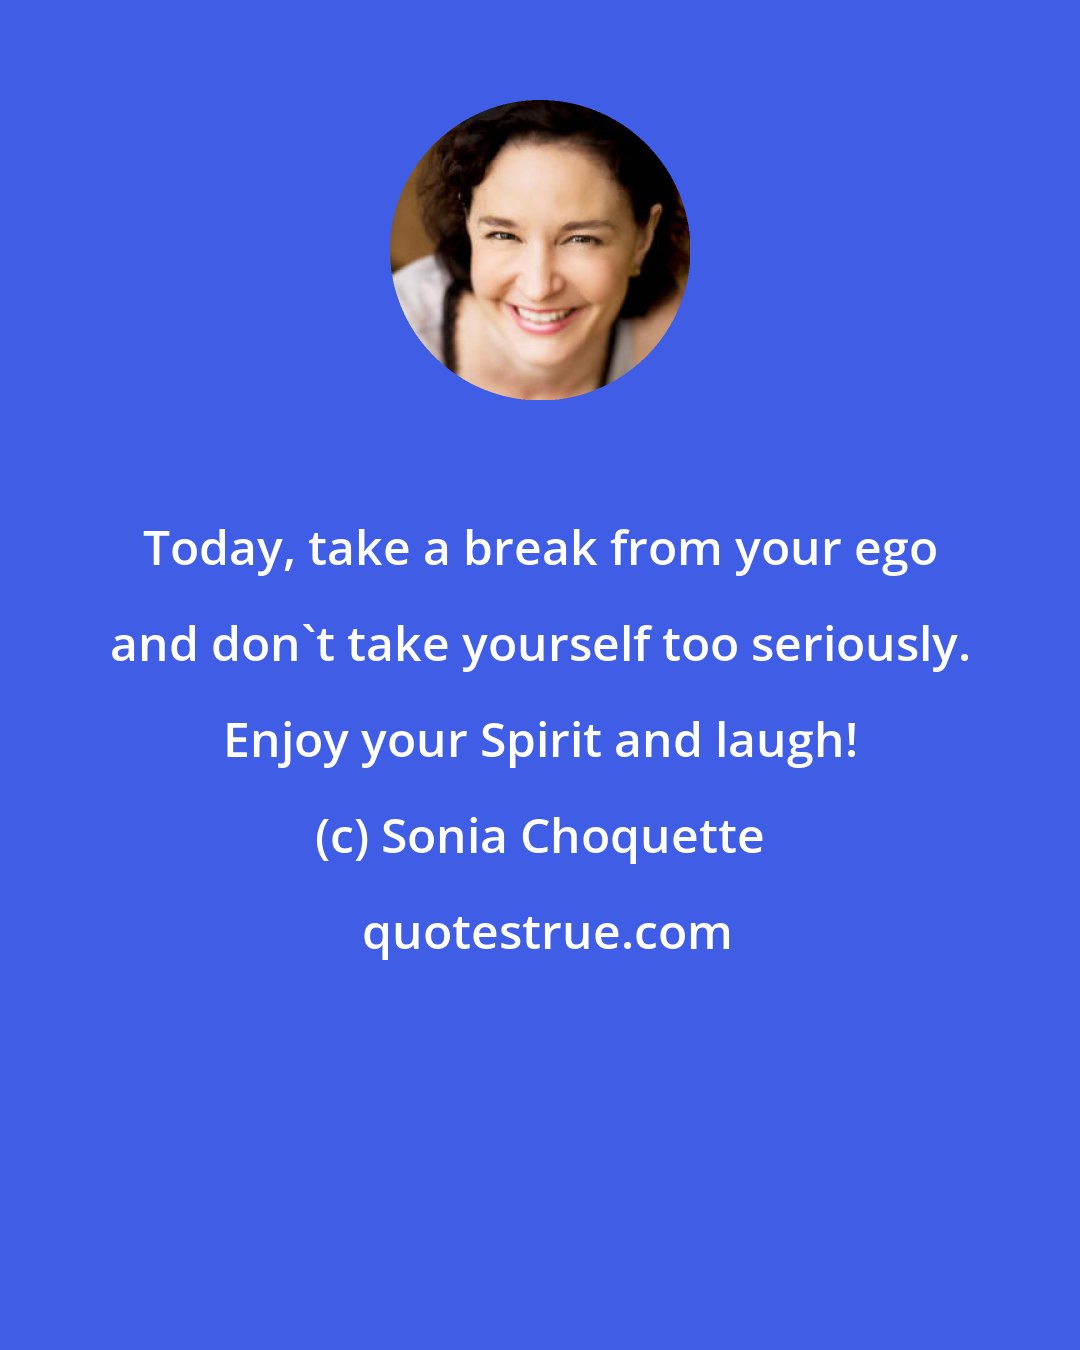 Sonia Choquette: Today, take a break from your ego and don't take yourself too seriously. Enjoy your Spirit and laugh!